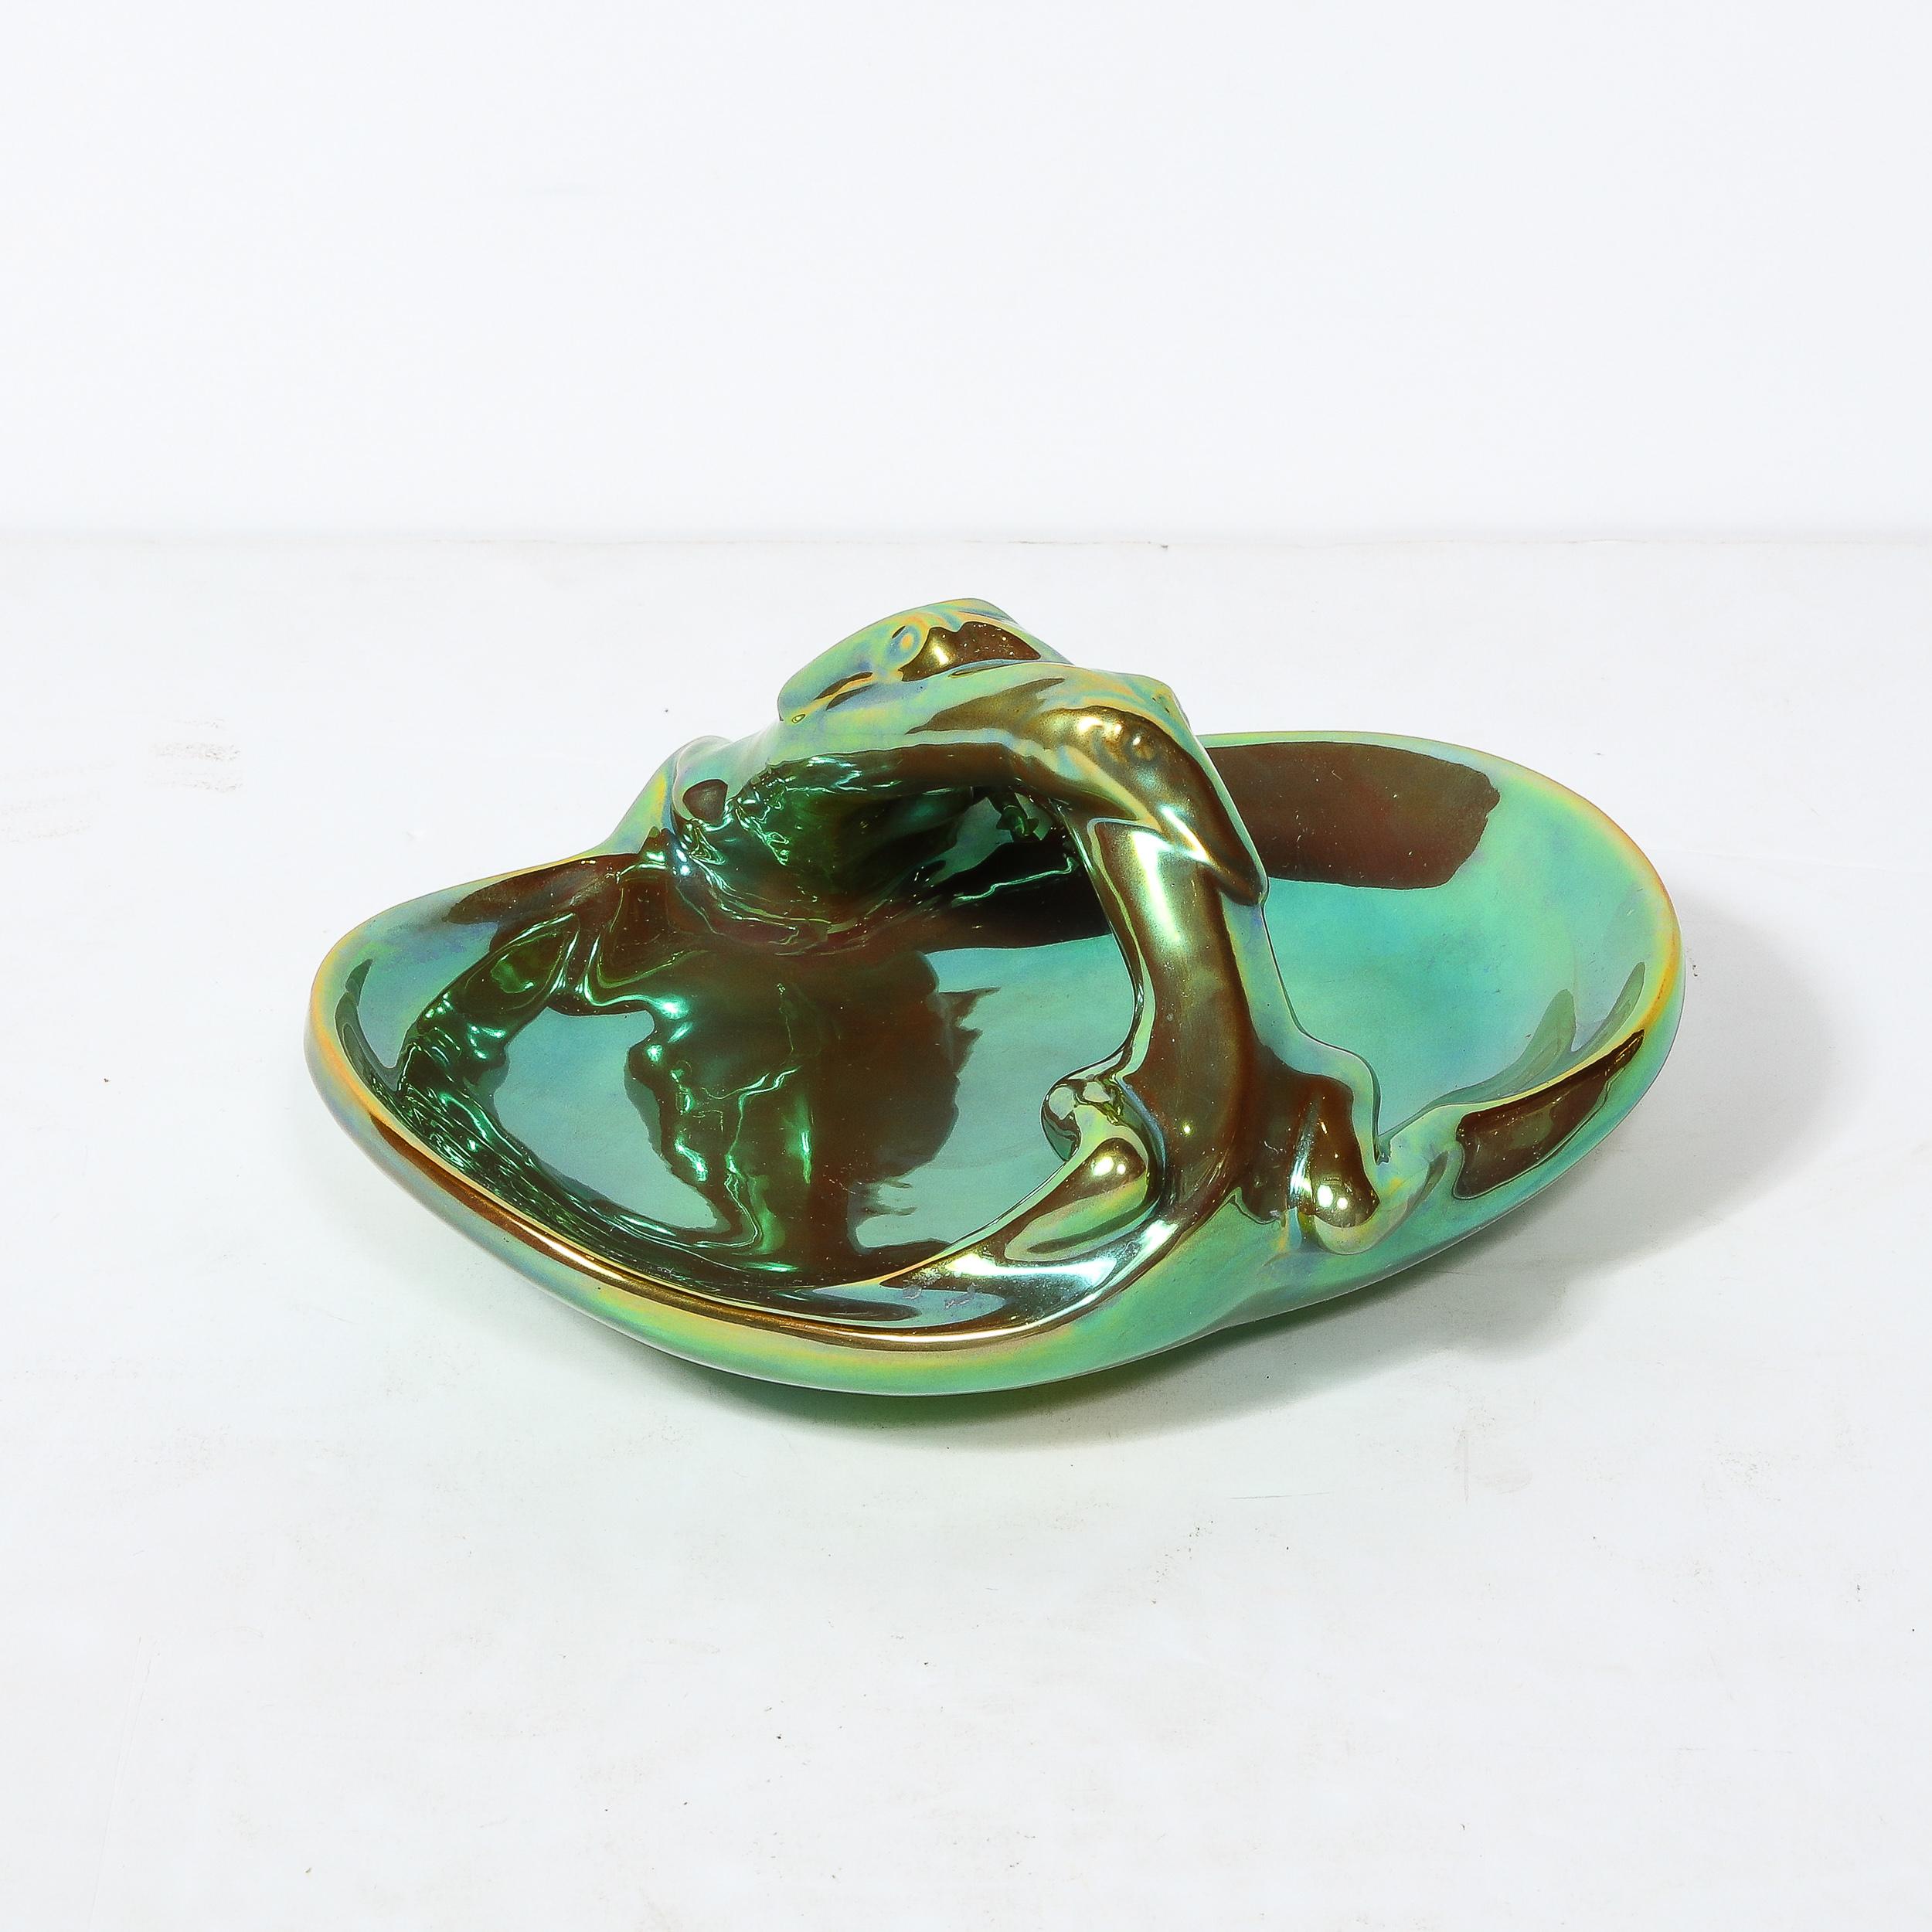 Art Deco Basket Form Ceramic Dish of Entwined Lizards by Zsolnay Eosin For Sale 2